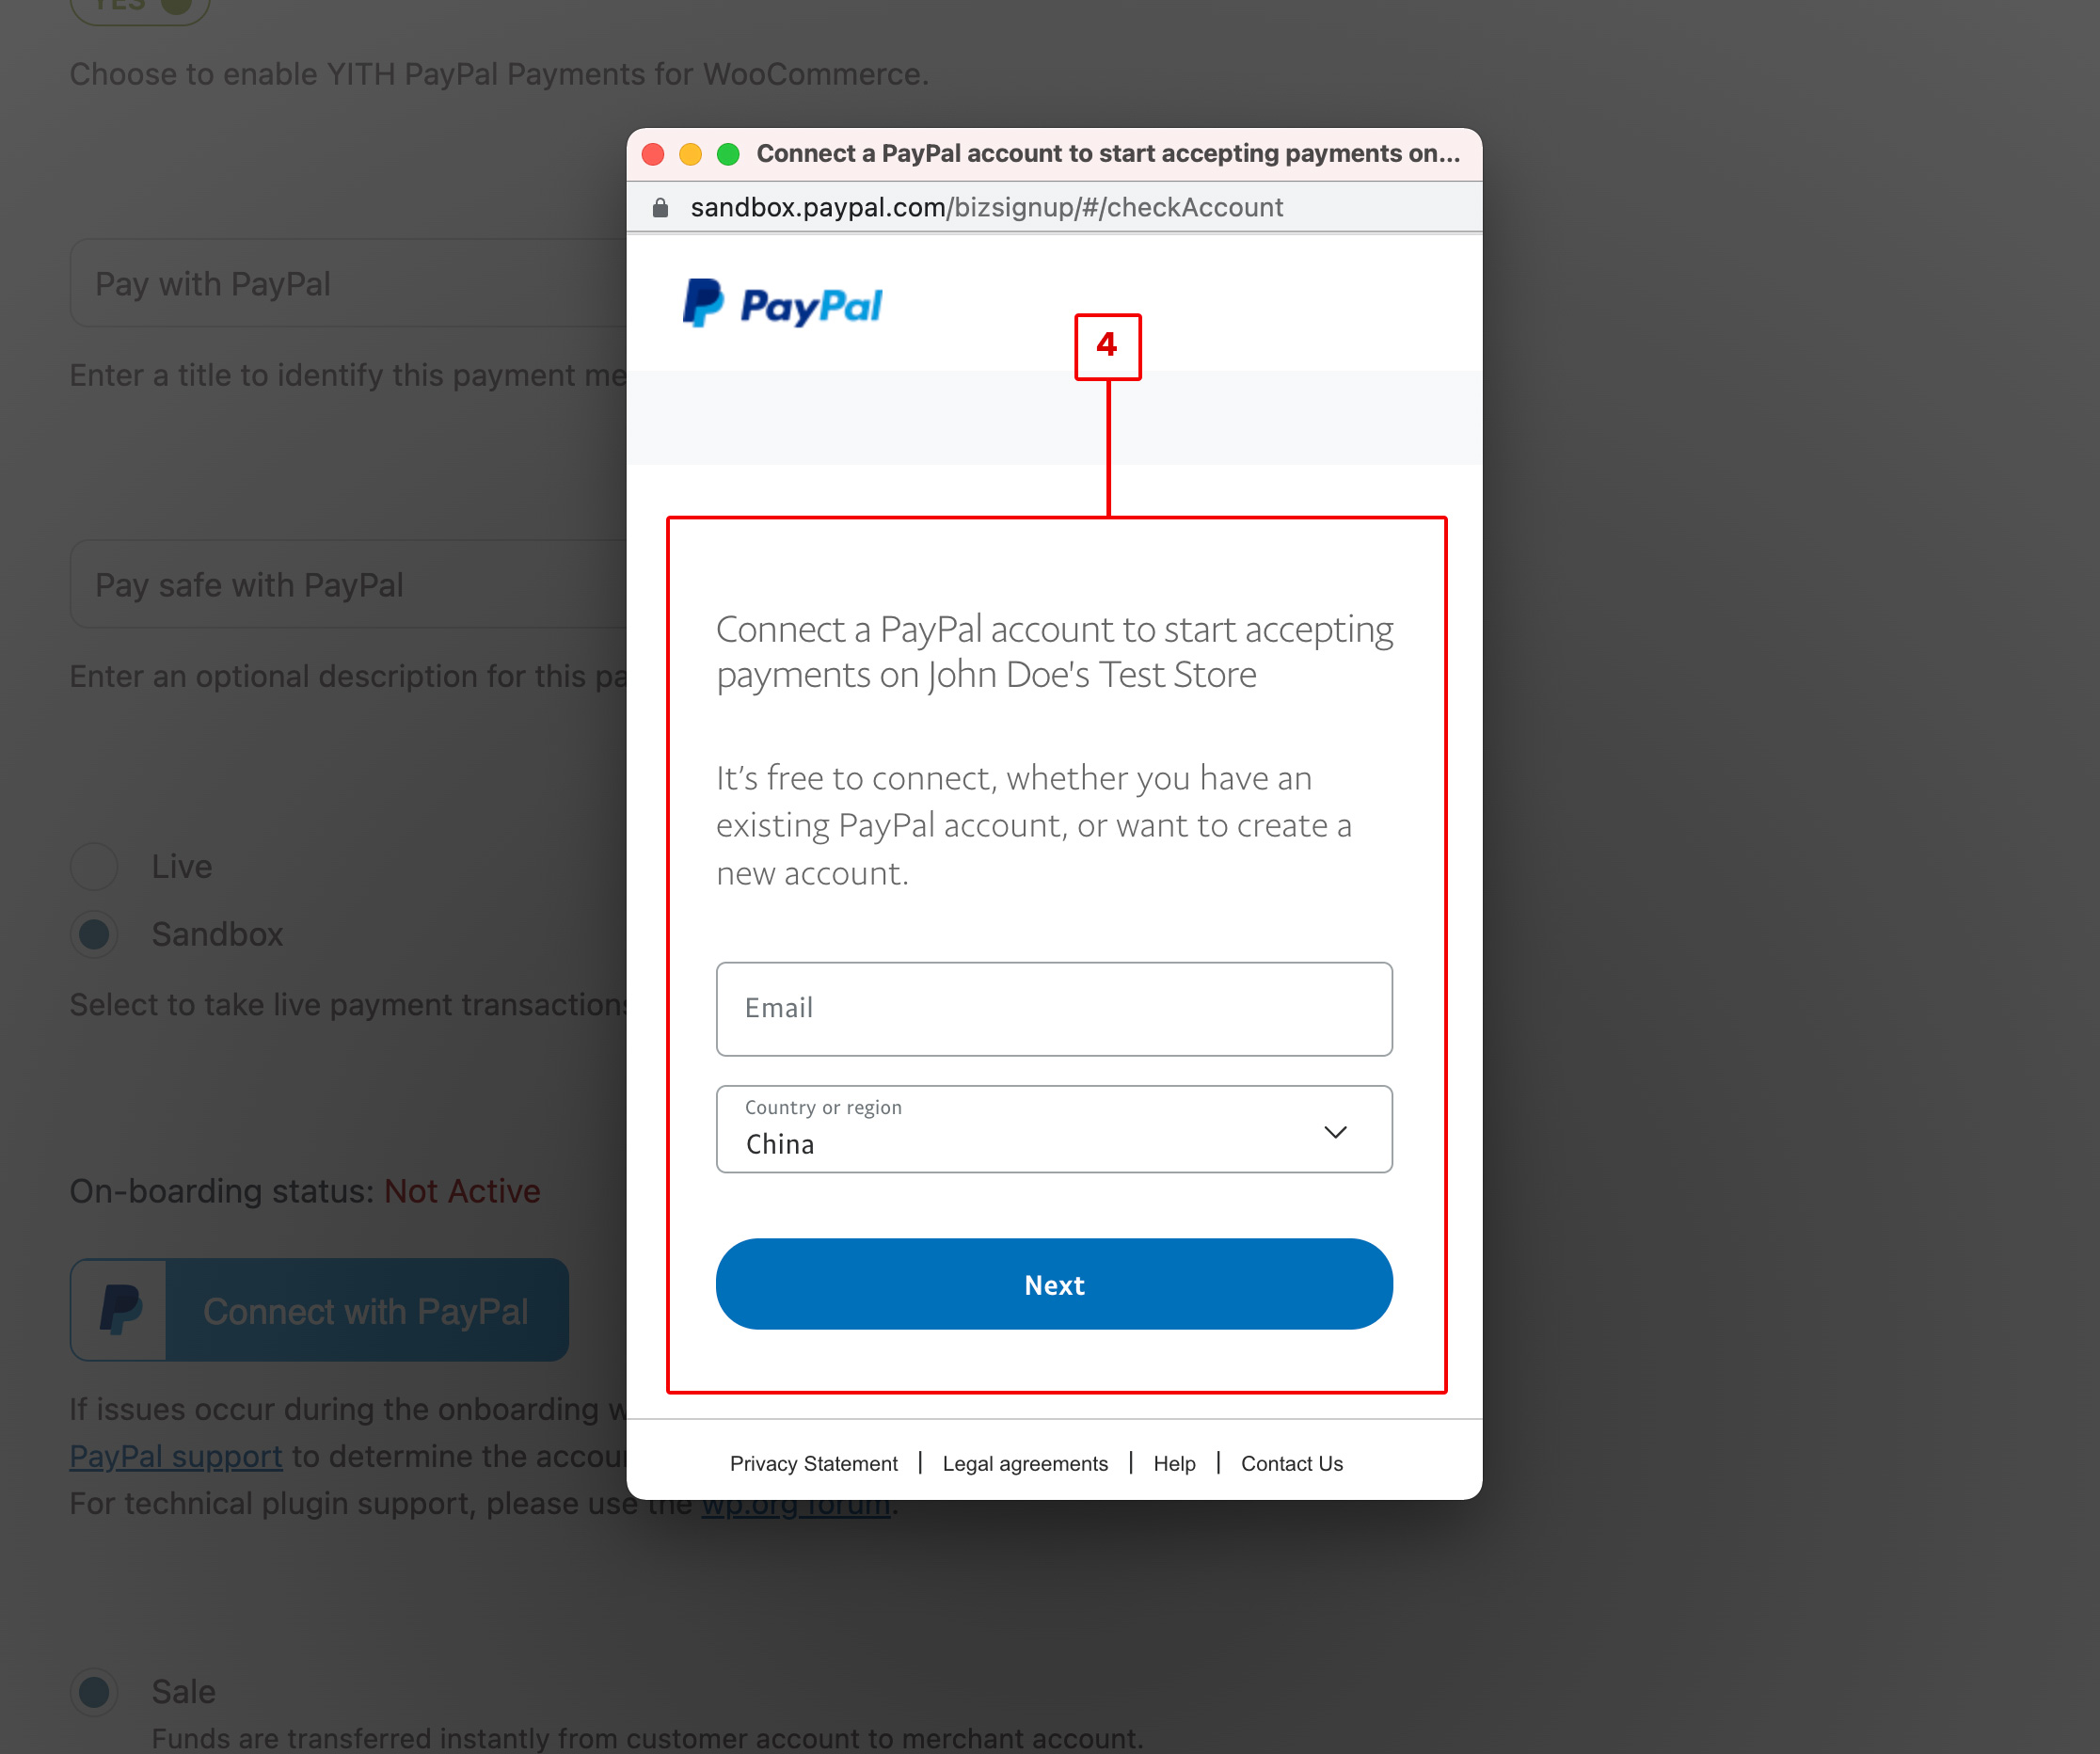 Screenshot of CD YITH WooCommerce PayPal Enter Credentials Screen